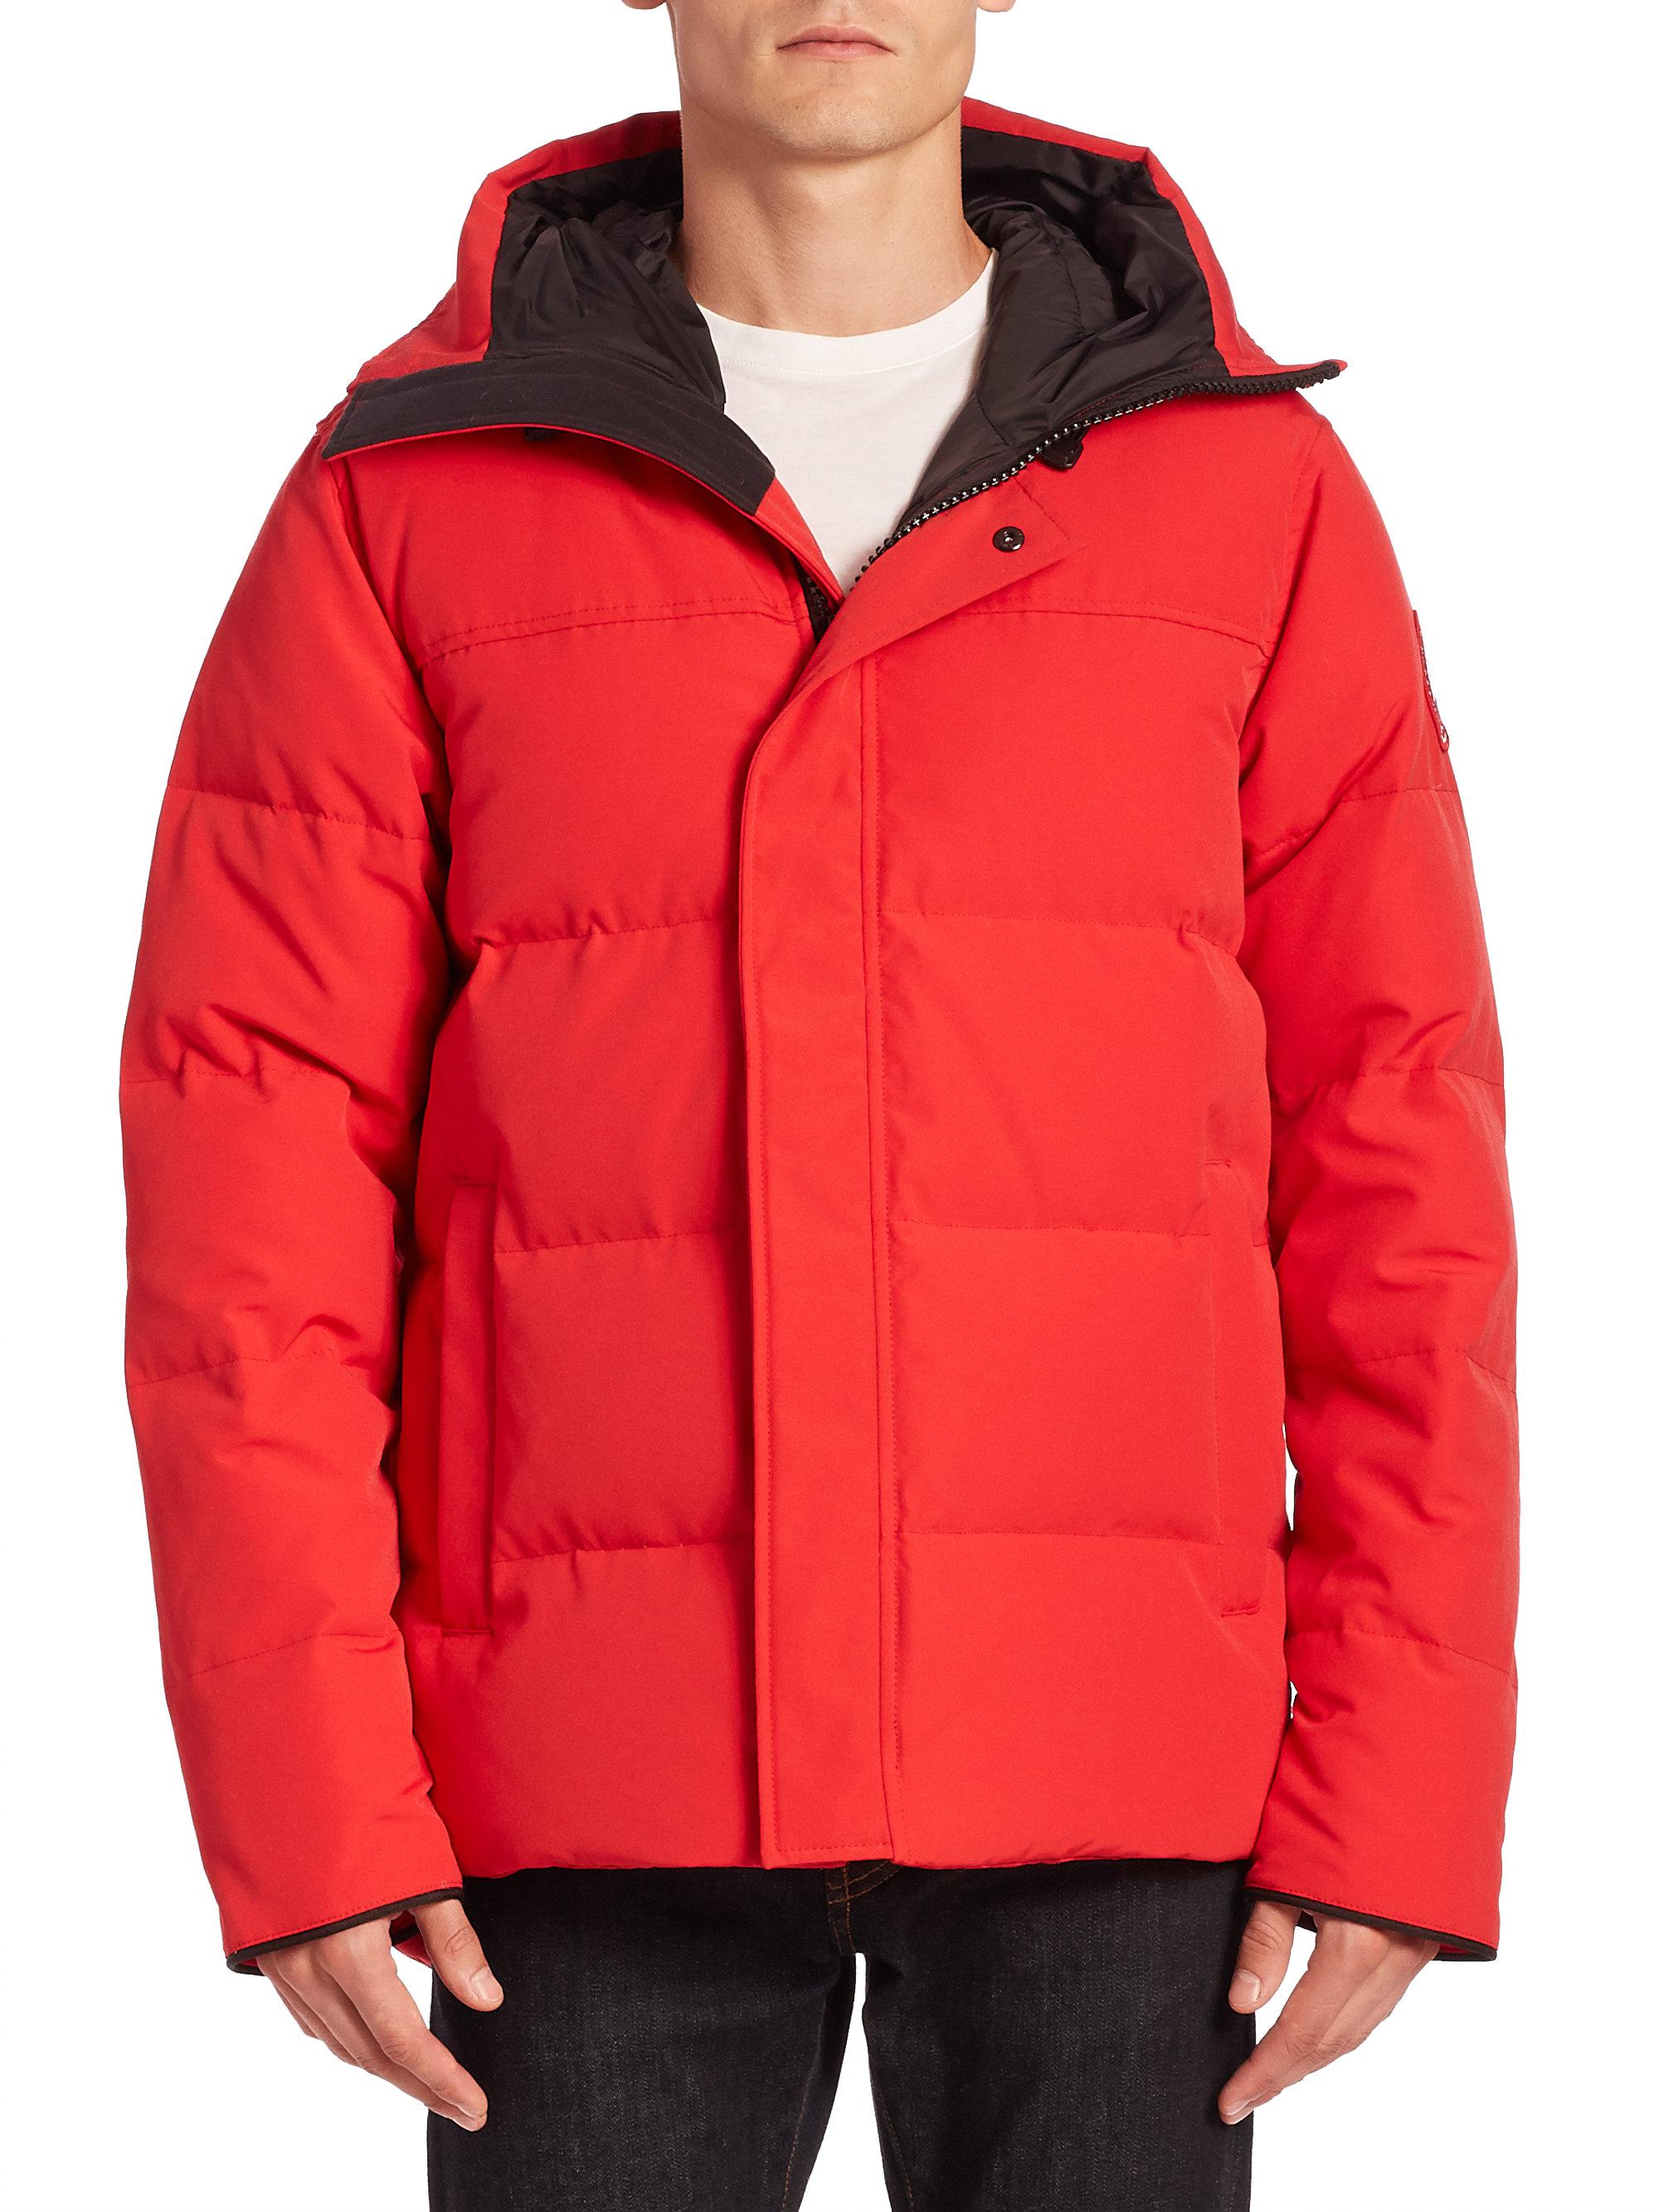 Canada Goose Synthetic Macmillan Parka in Red for Men - Lyst